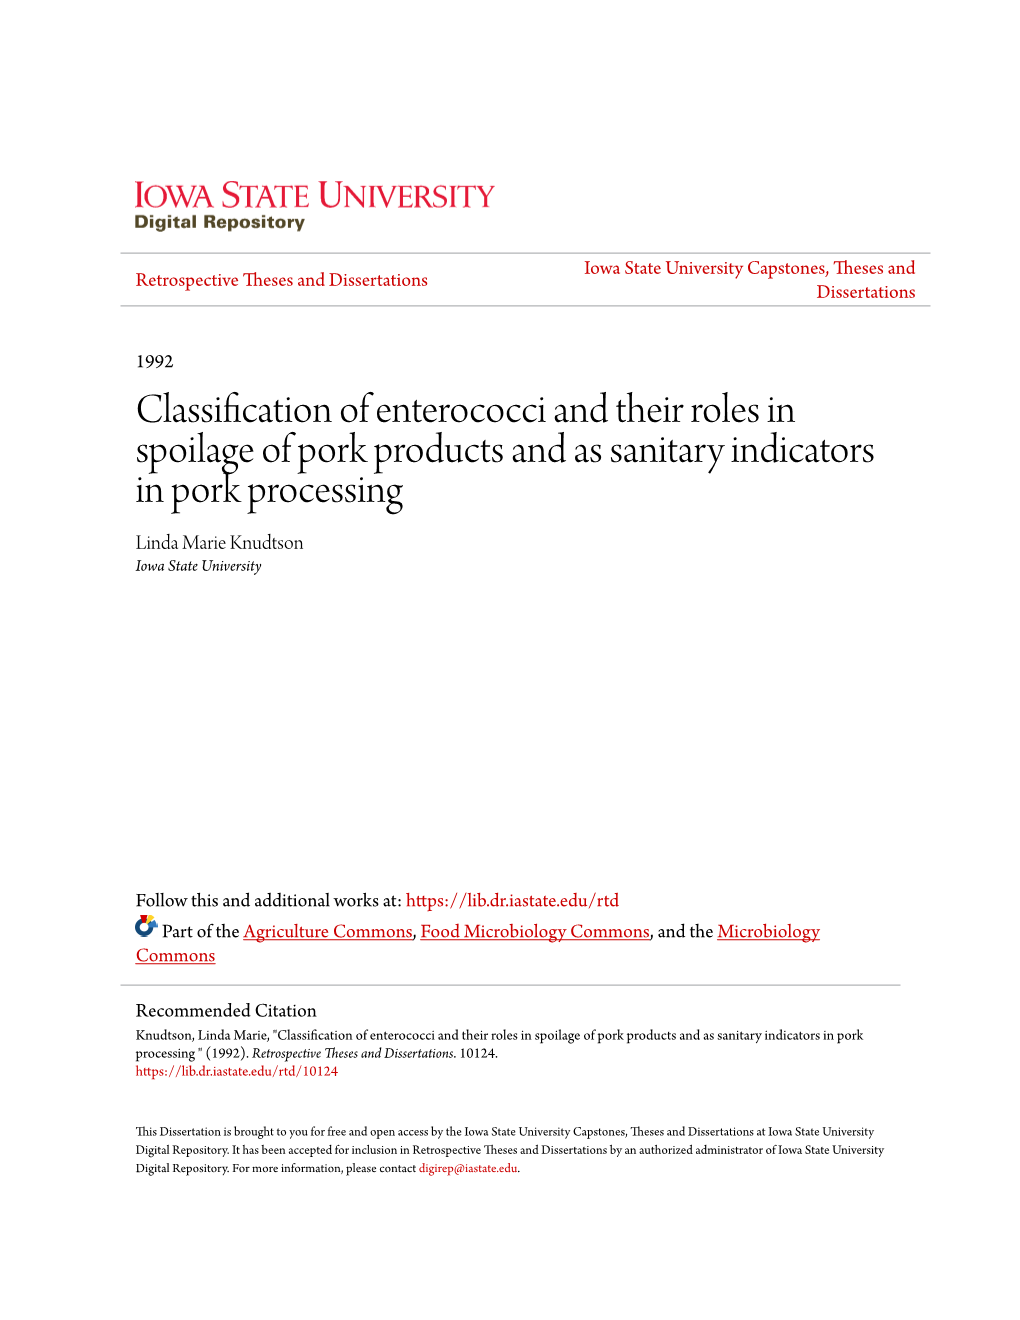 Classification of Enterococci and Their Roles in Spoilage of Pork Products and As Sanitary Indicators in Pork Processing Linda Marie Knudtson Iowa State University